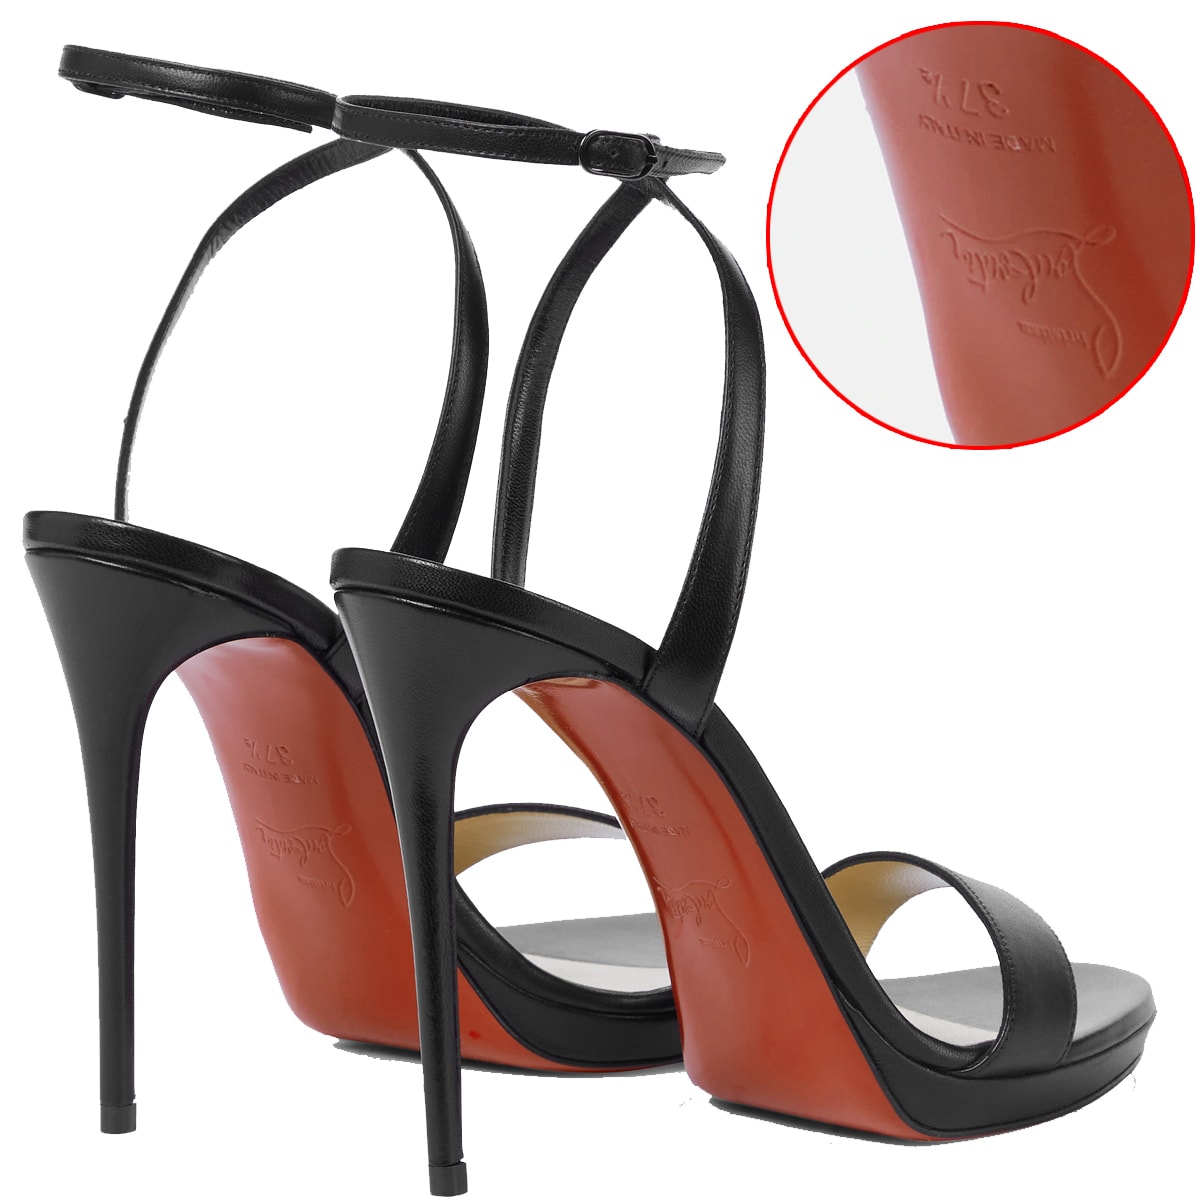 Itsnina_ox: How to spot fake Christian Louboutin Shoes